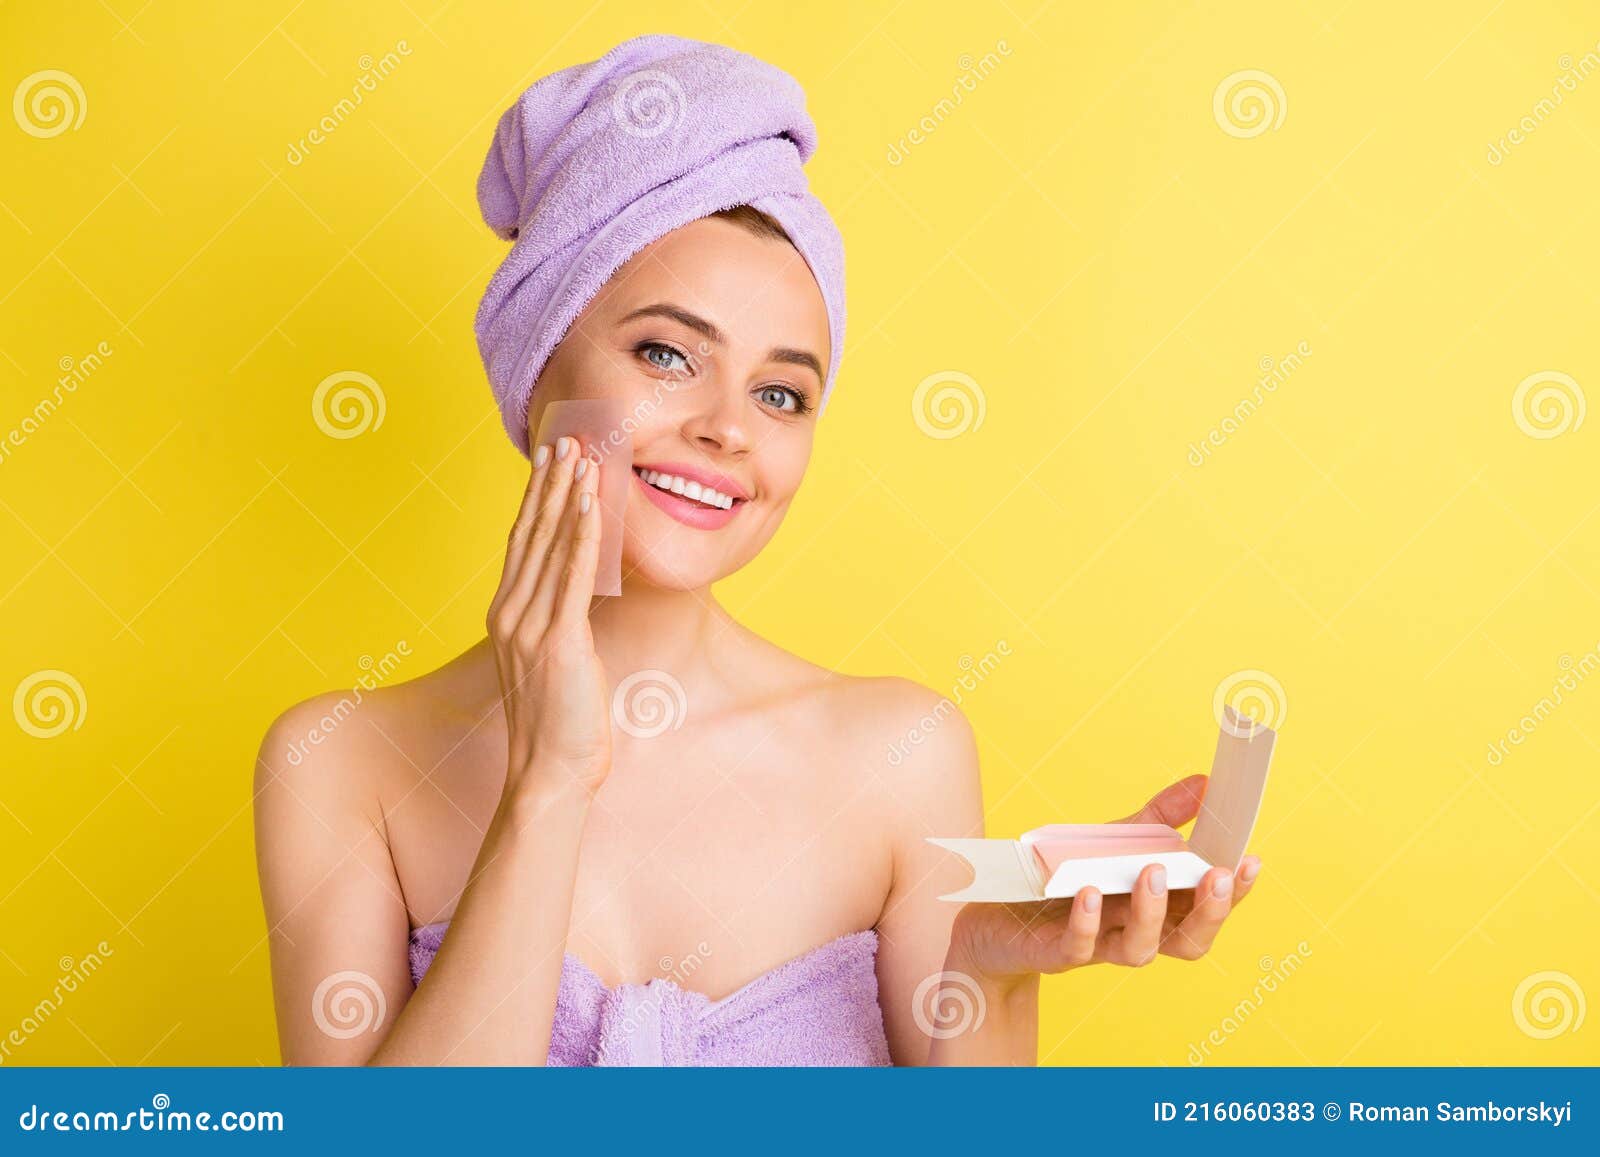 close-up portrait of charming cheery girl wiping oily skin with napkin  over vibrant yellow color background